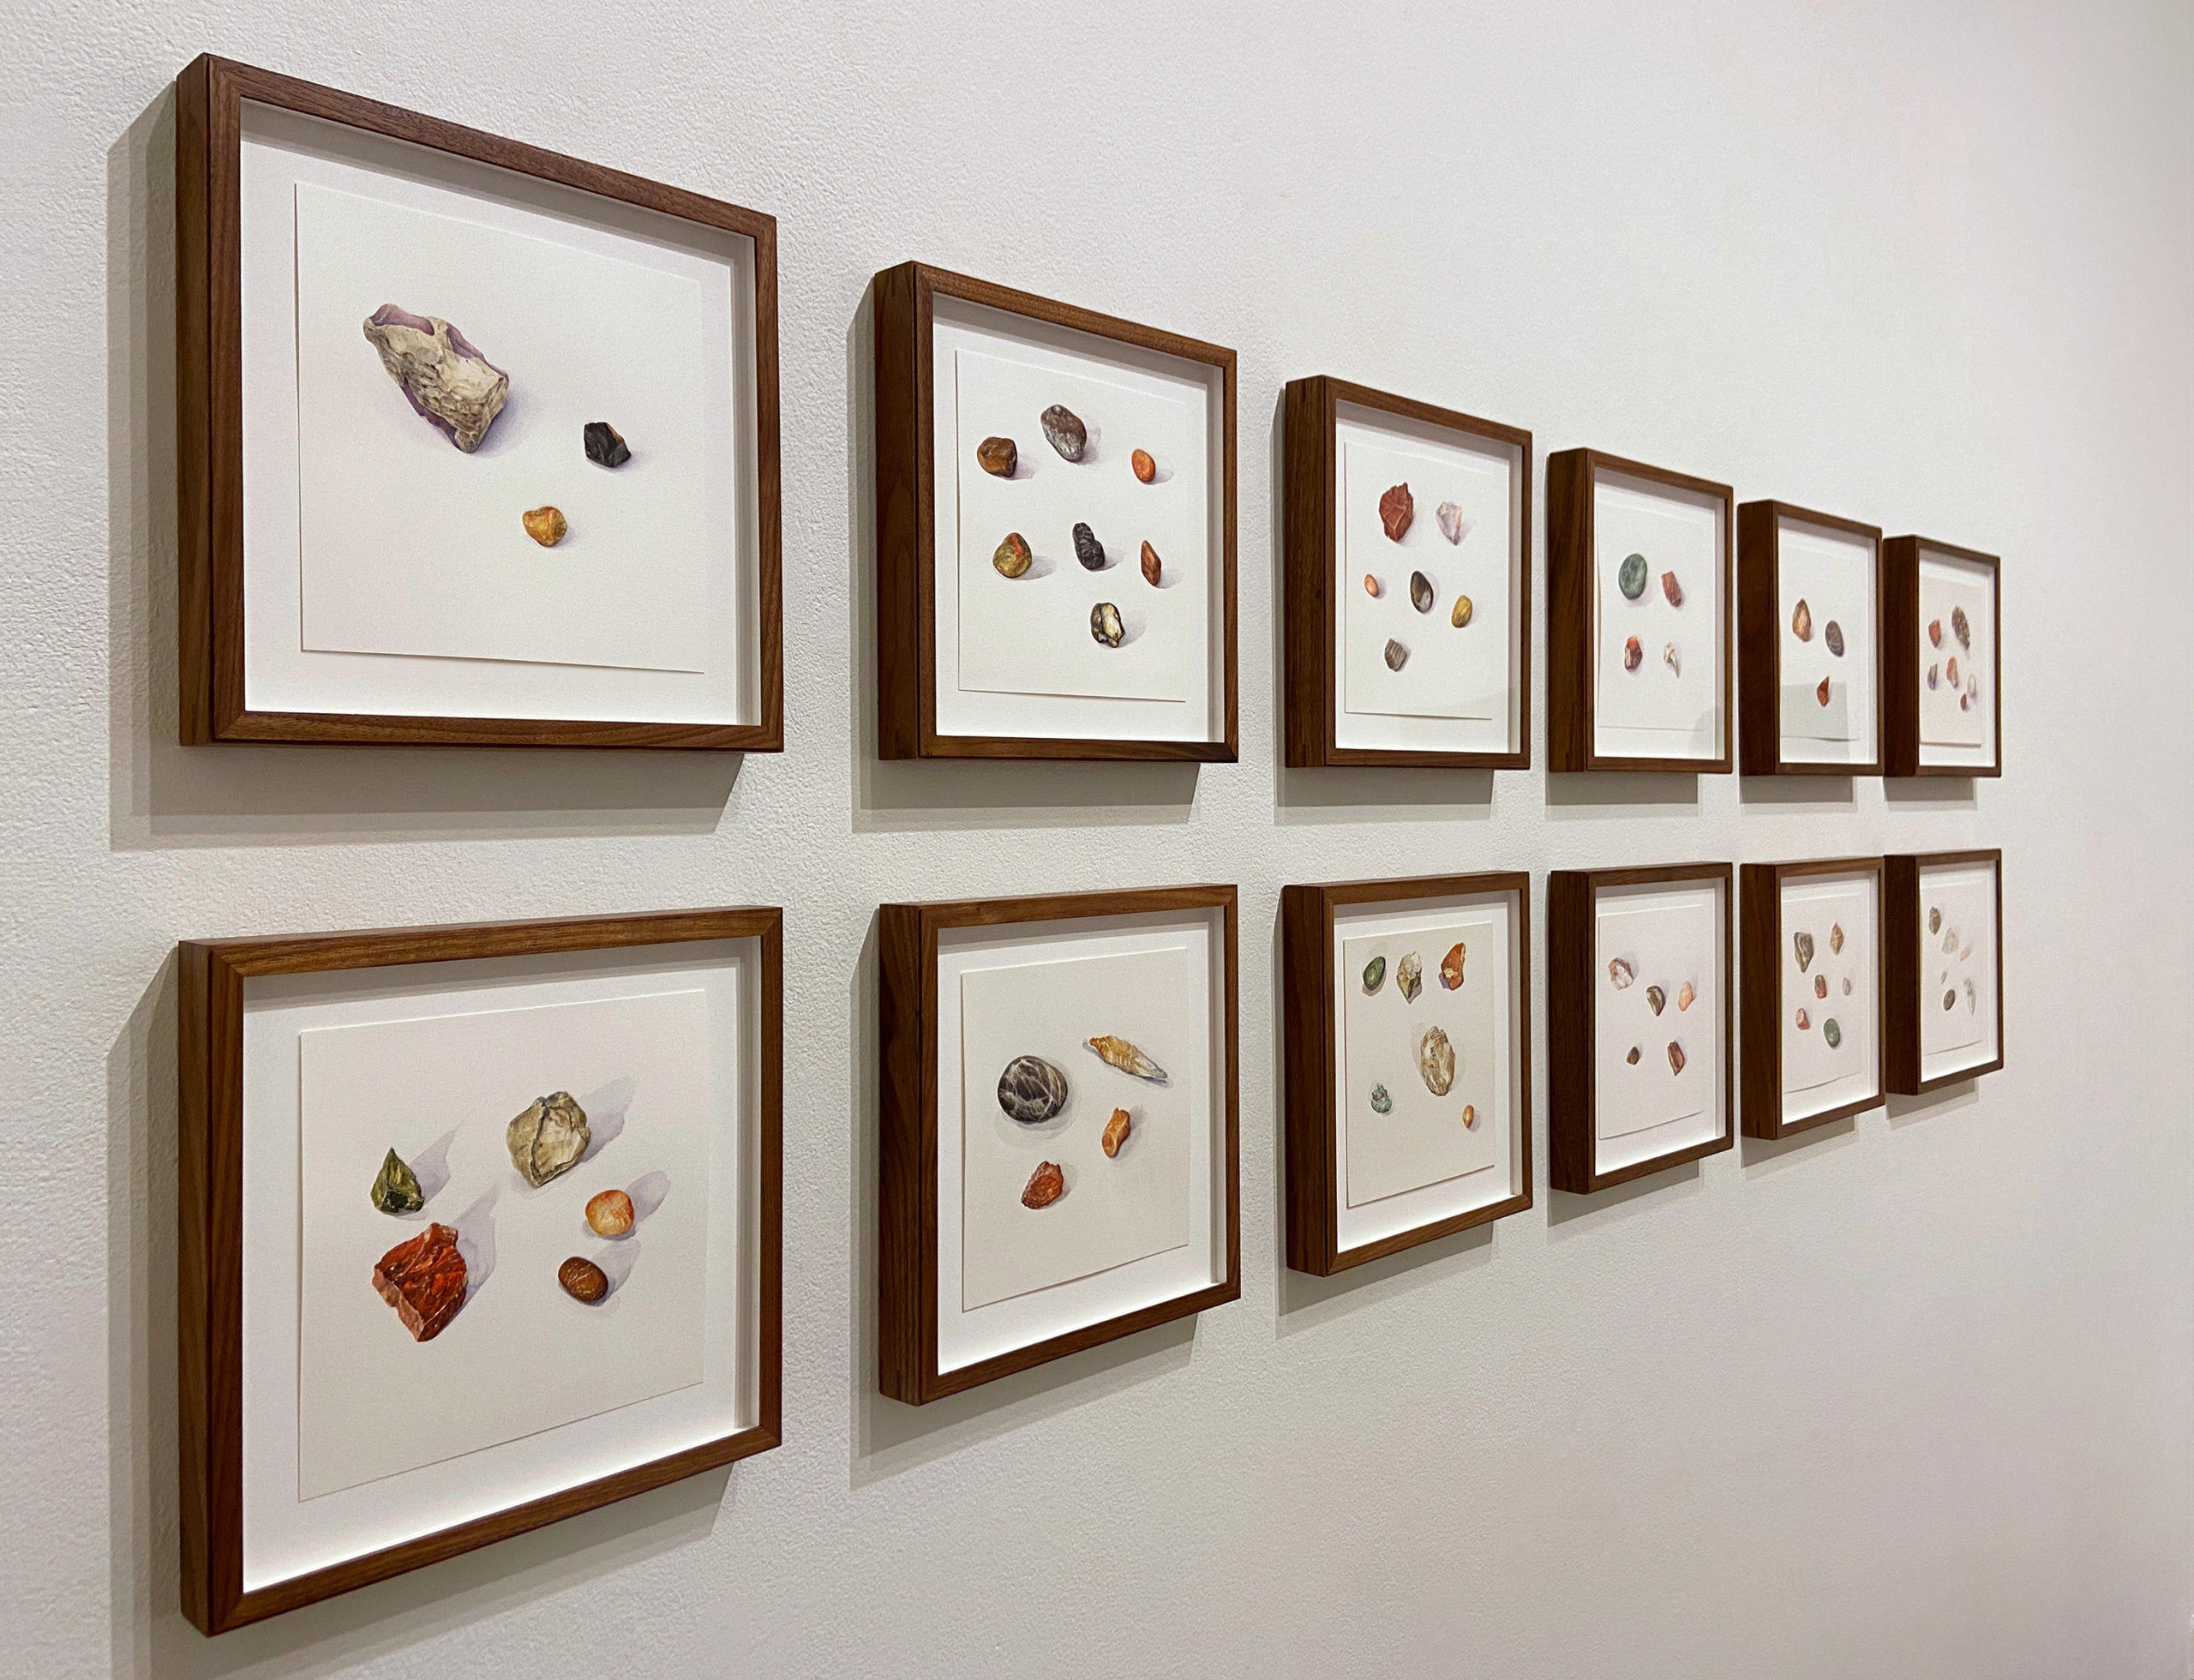 Watercolor paintings of the rocks collected by Alison Moritsugu's grandfather on display at the "Moons and Internment Stones" exhibition at the Brattleboro Museum & Art Center.